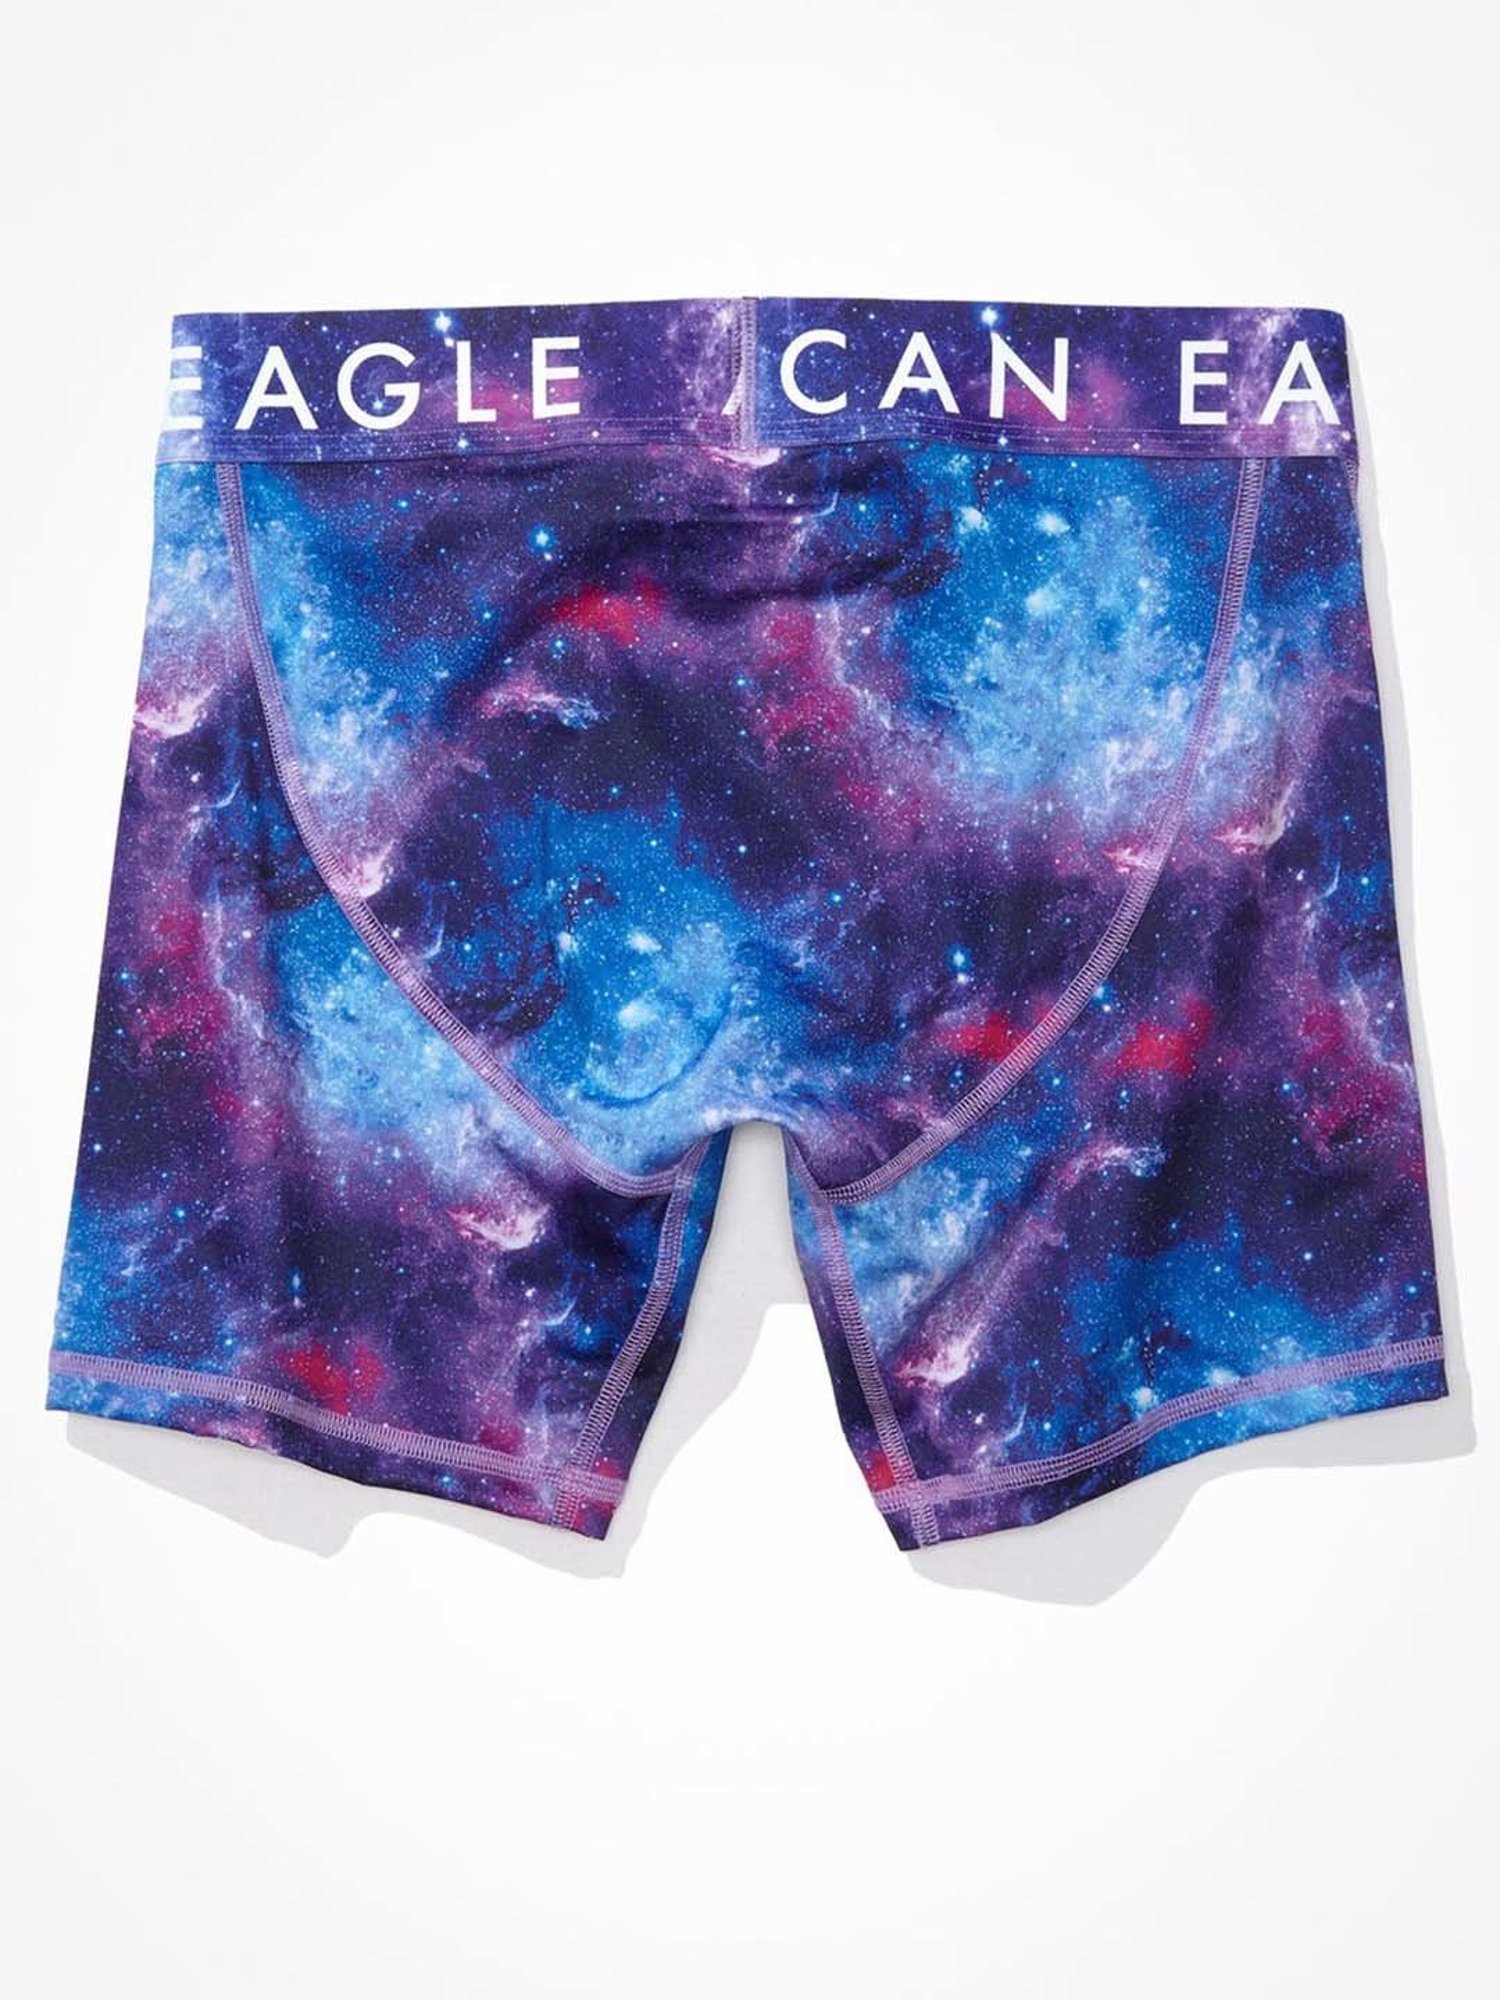 American Eagle Outfitters Multicolor Graphic Print Trunks